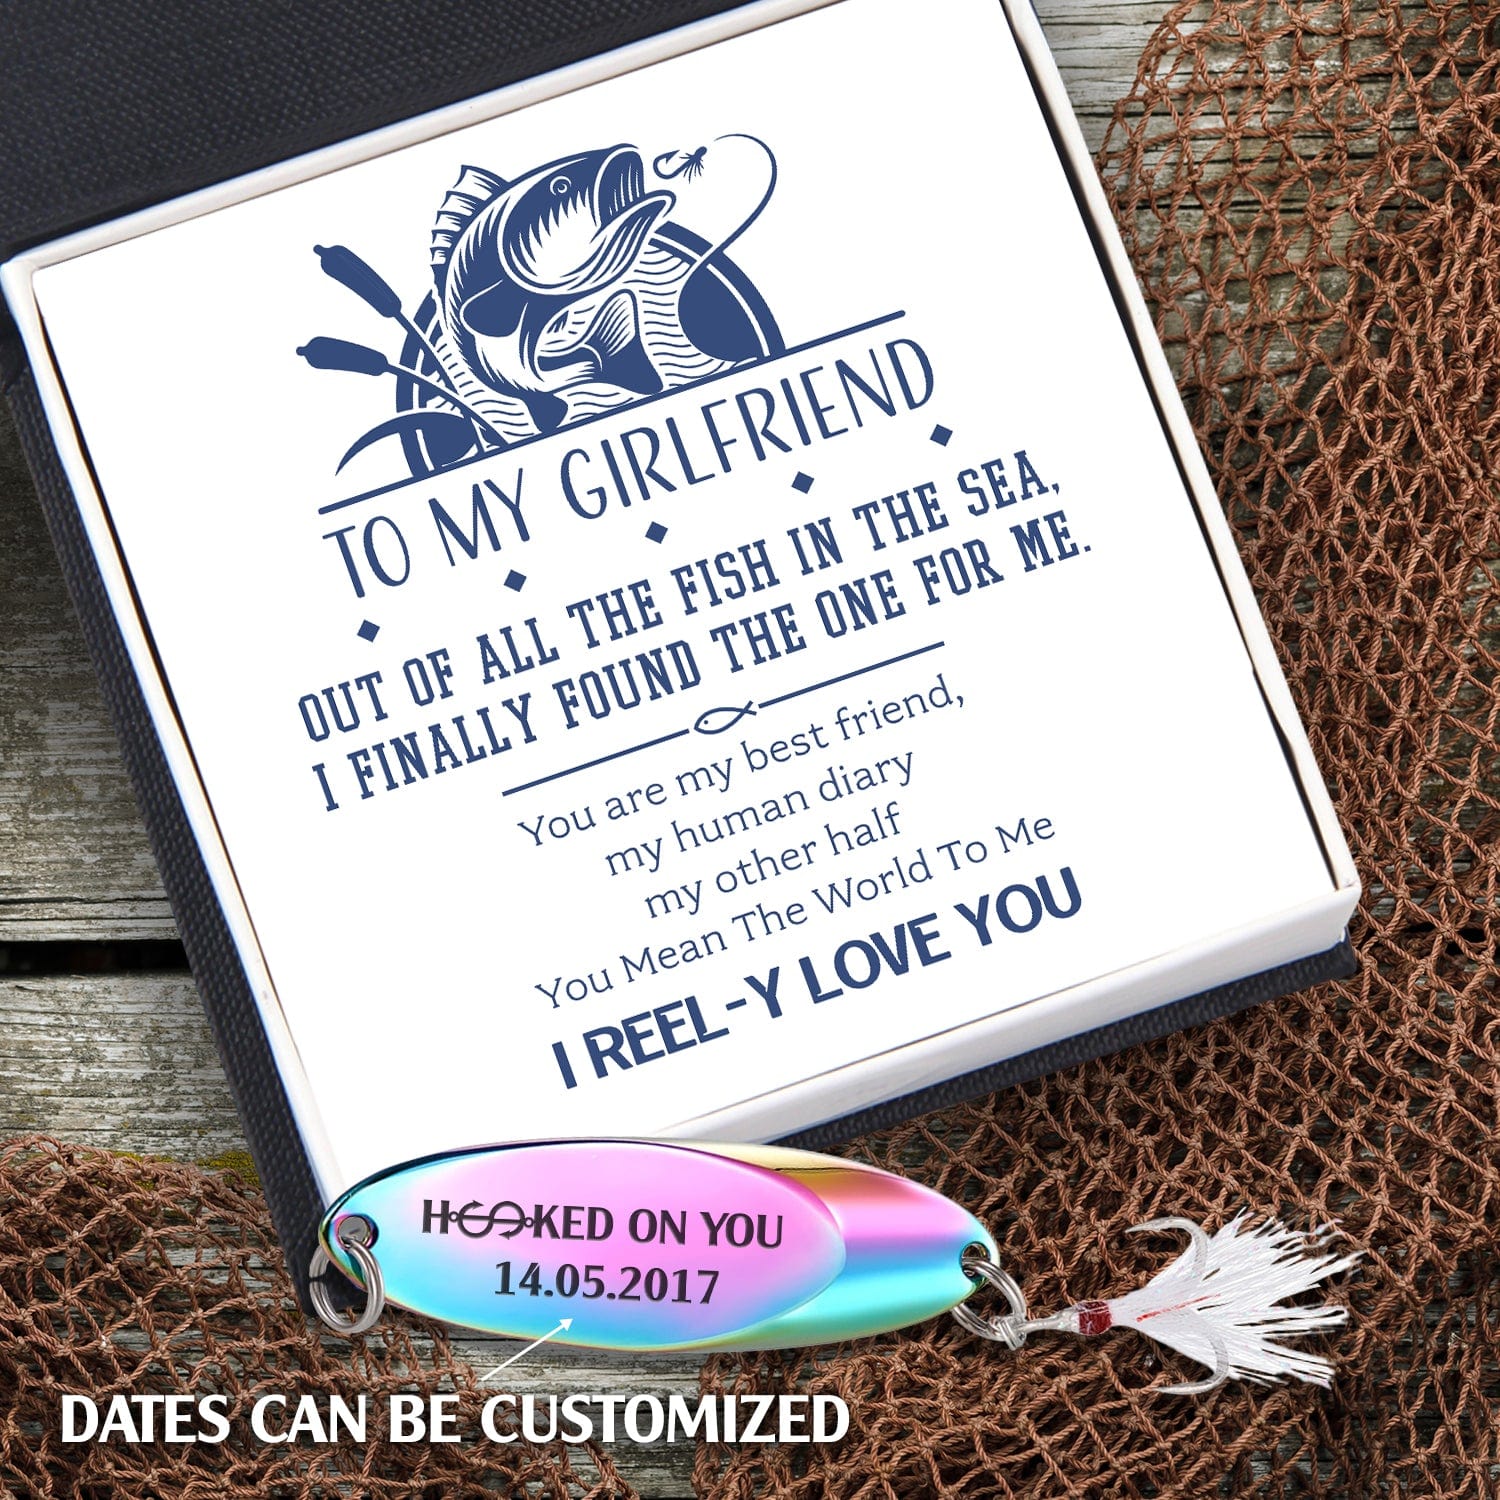 Personalized Sequin Fishing Bait - Fishing - To My Girlfriend - I Reel-y Love You - Gfab13003